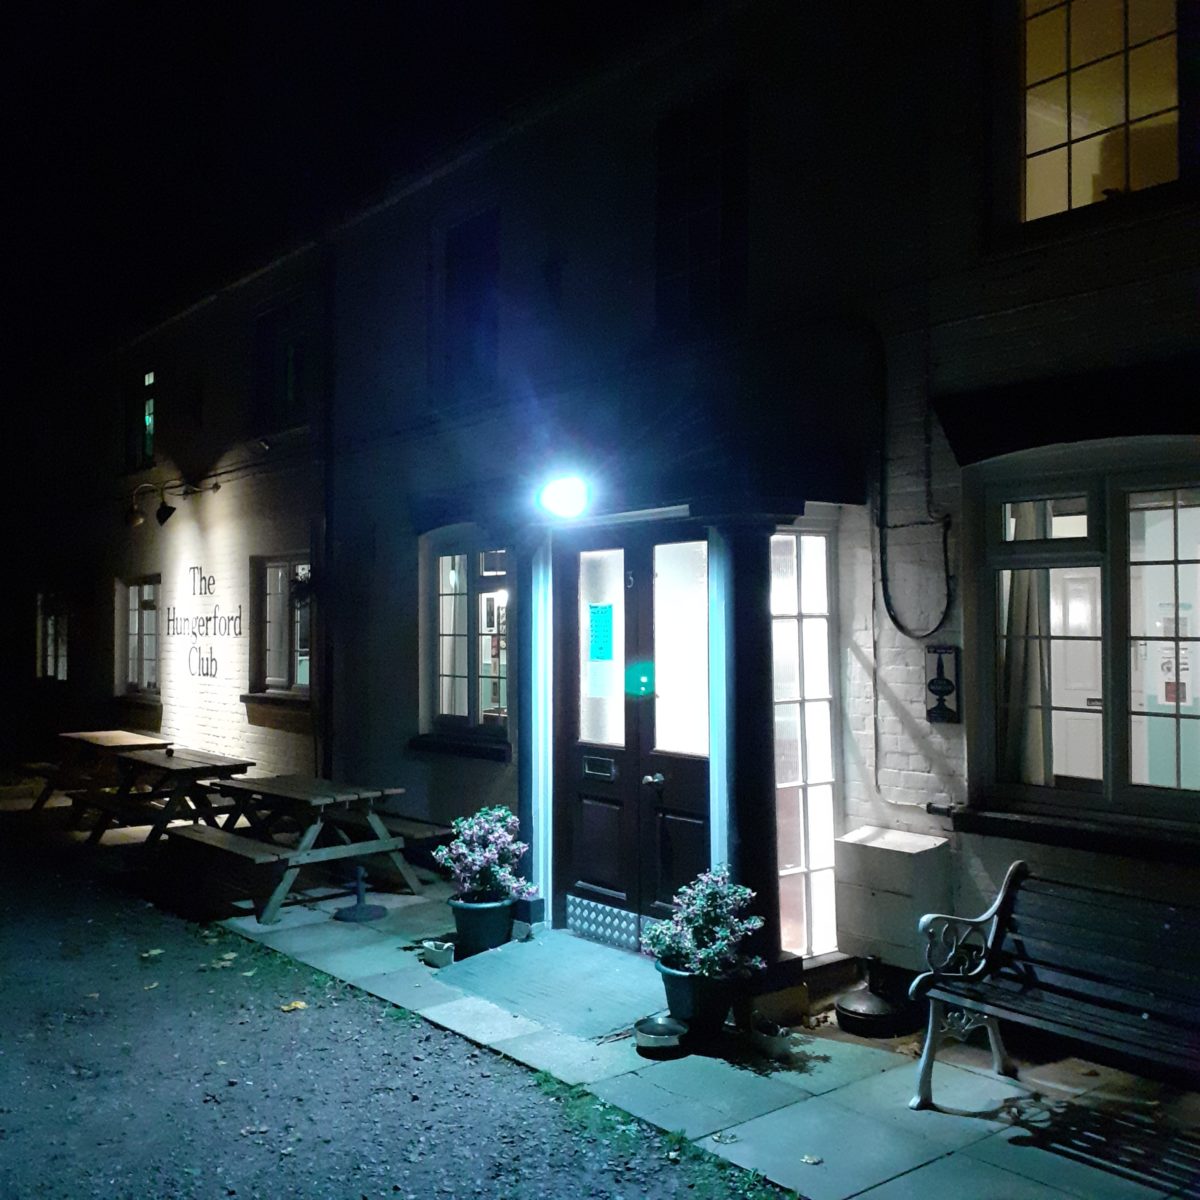 Hungerford Club clubhouse at night - October 2021